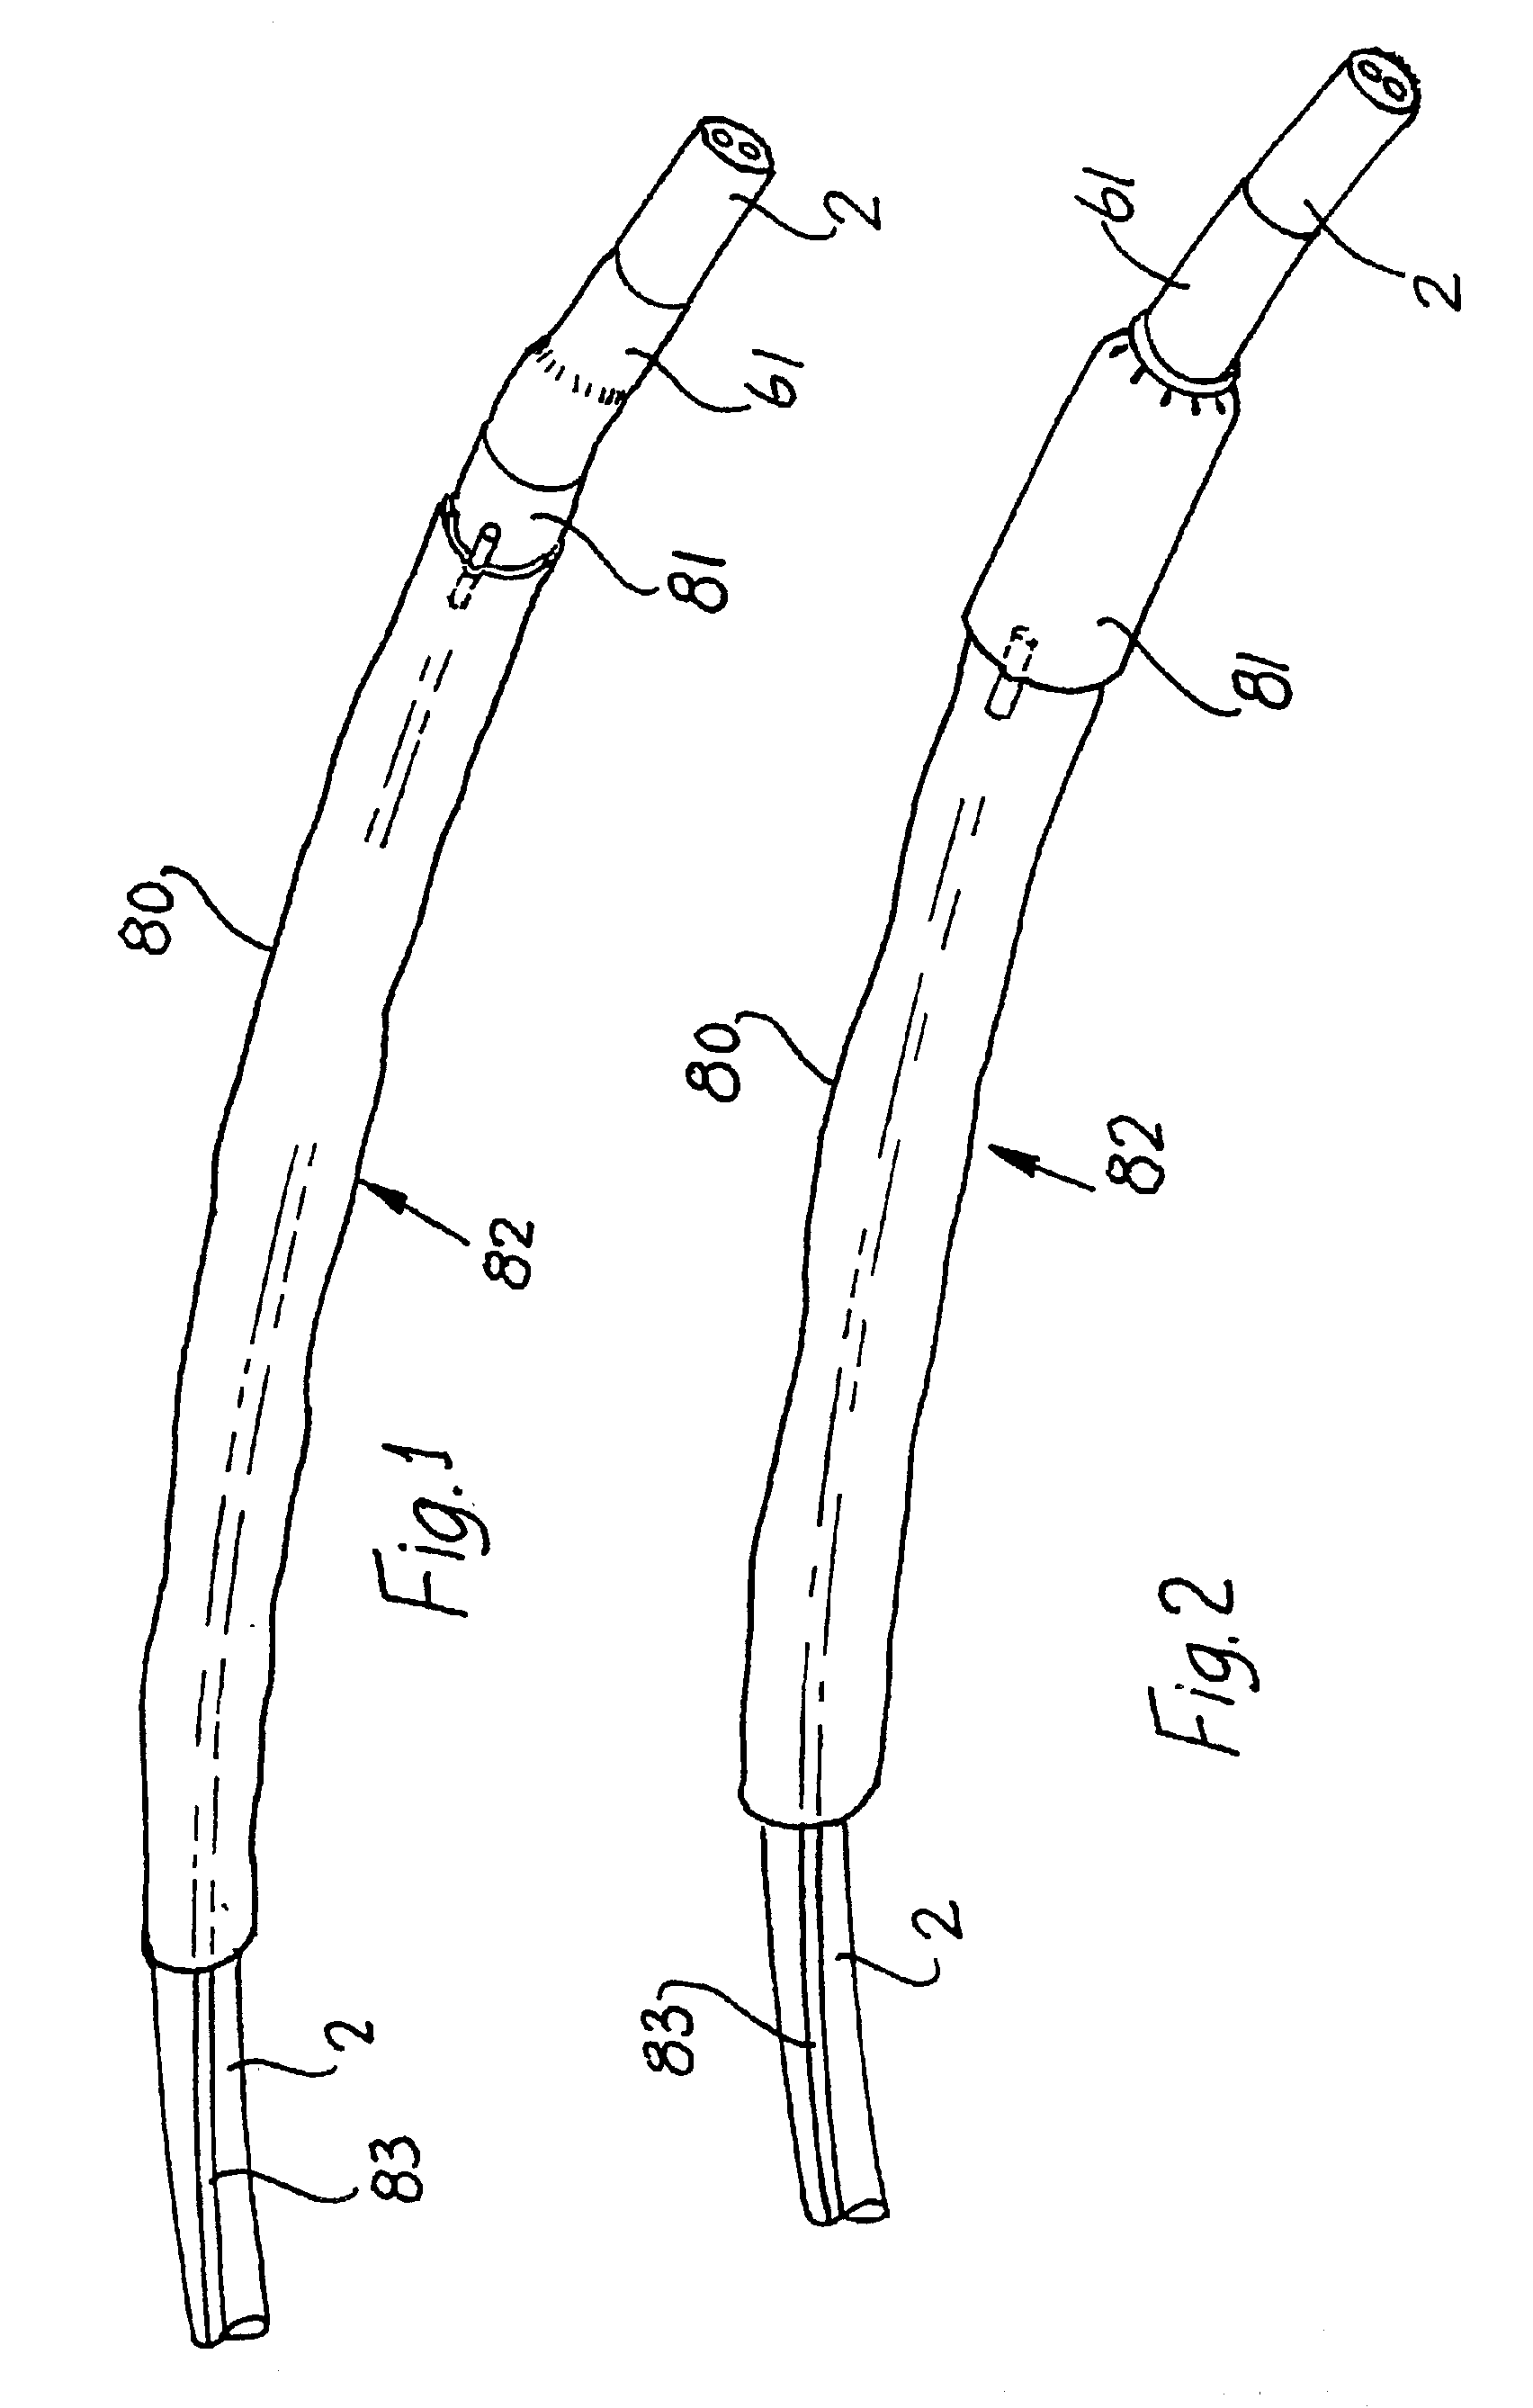 Insertion device for an endoscope